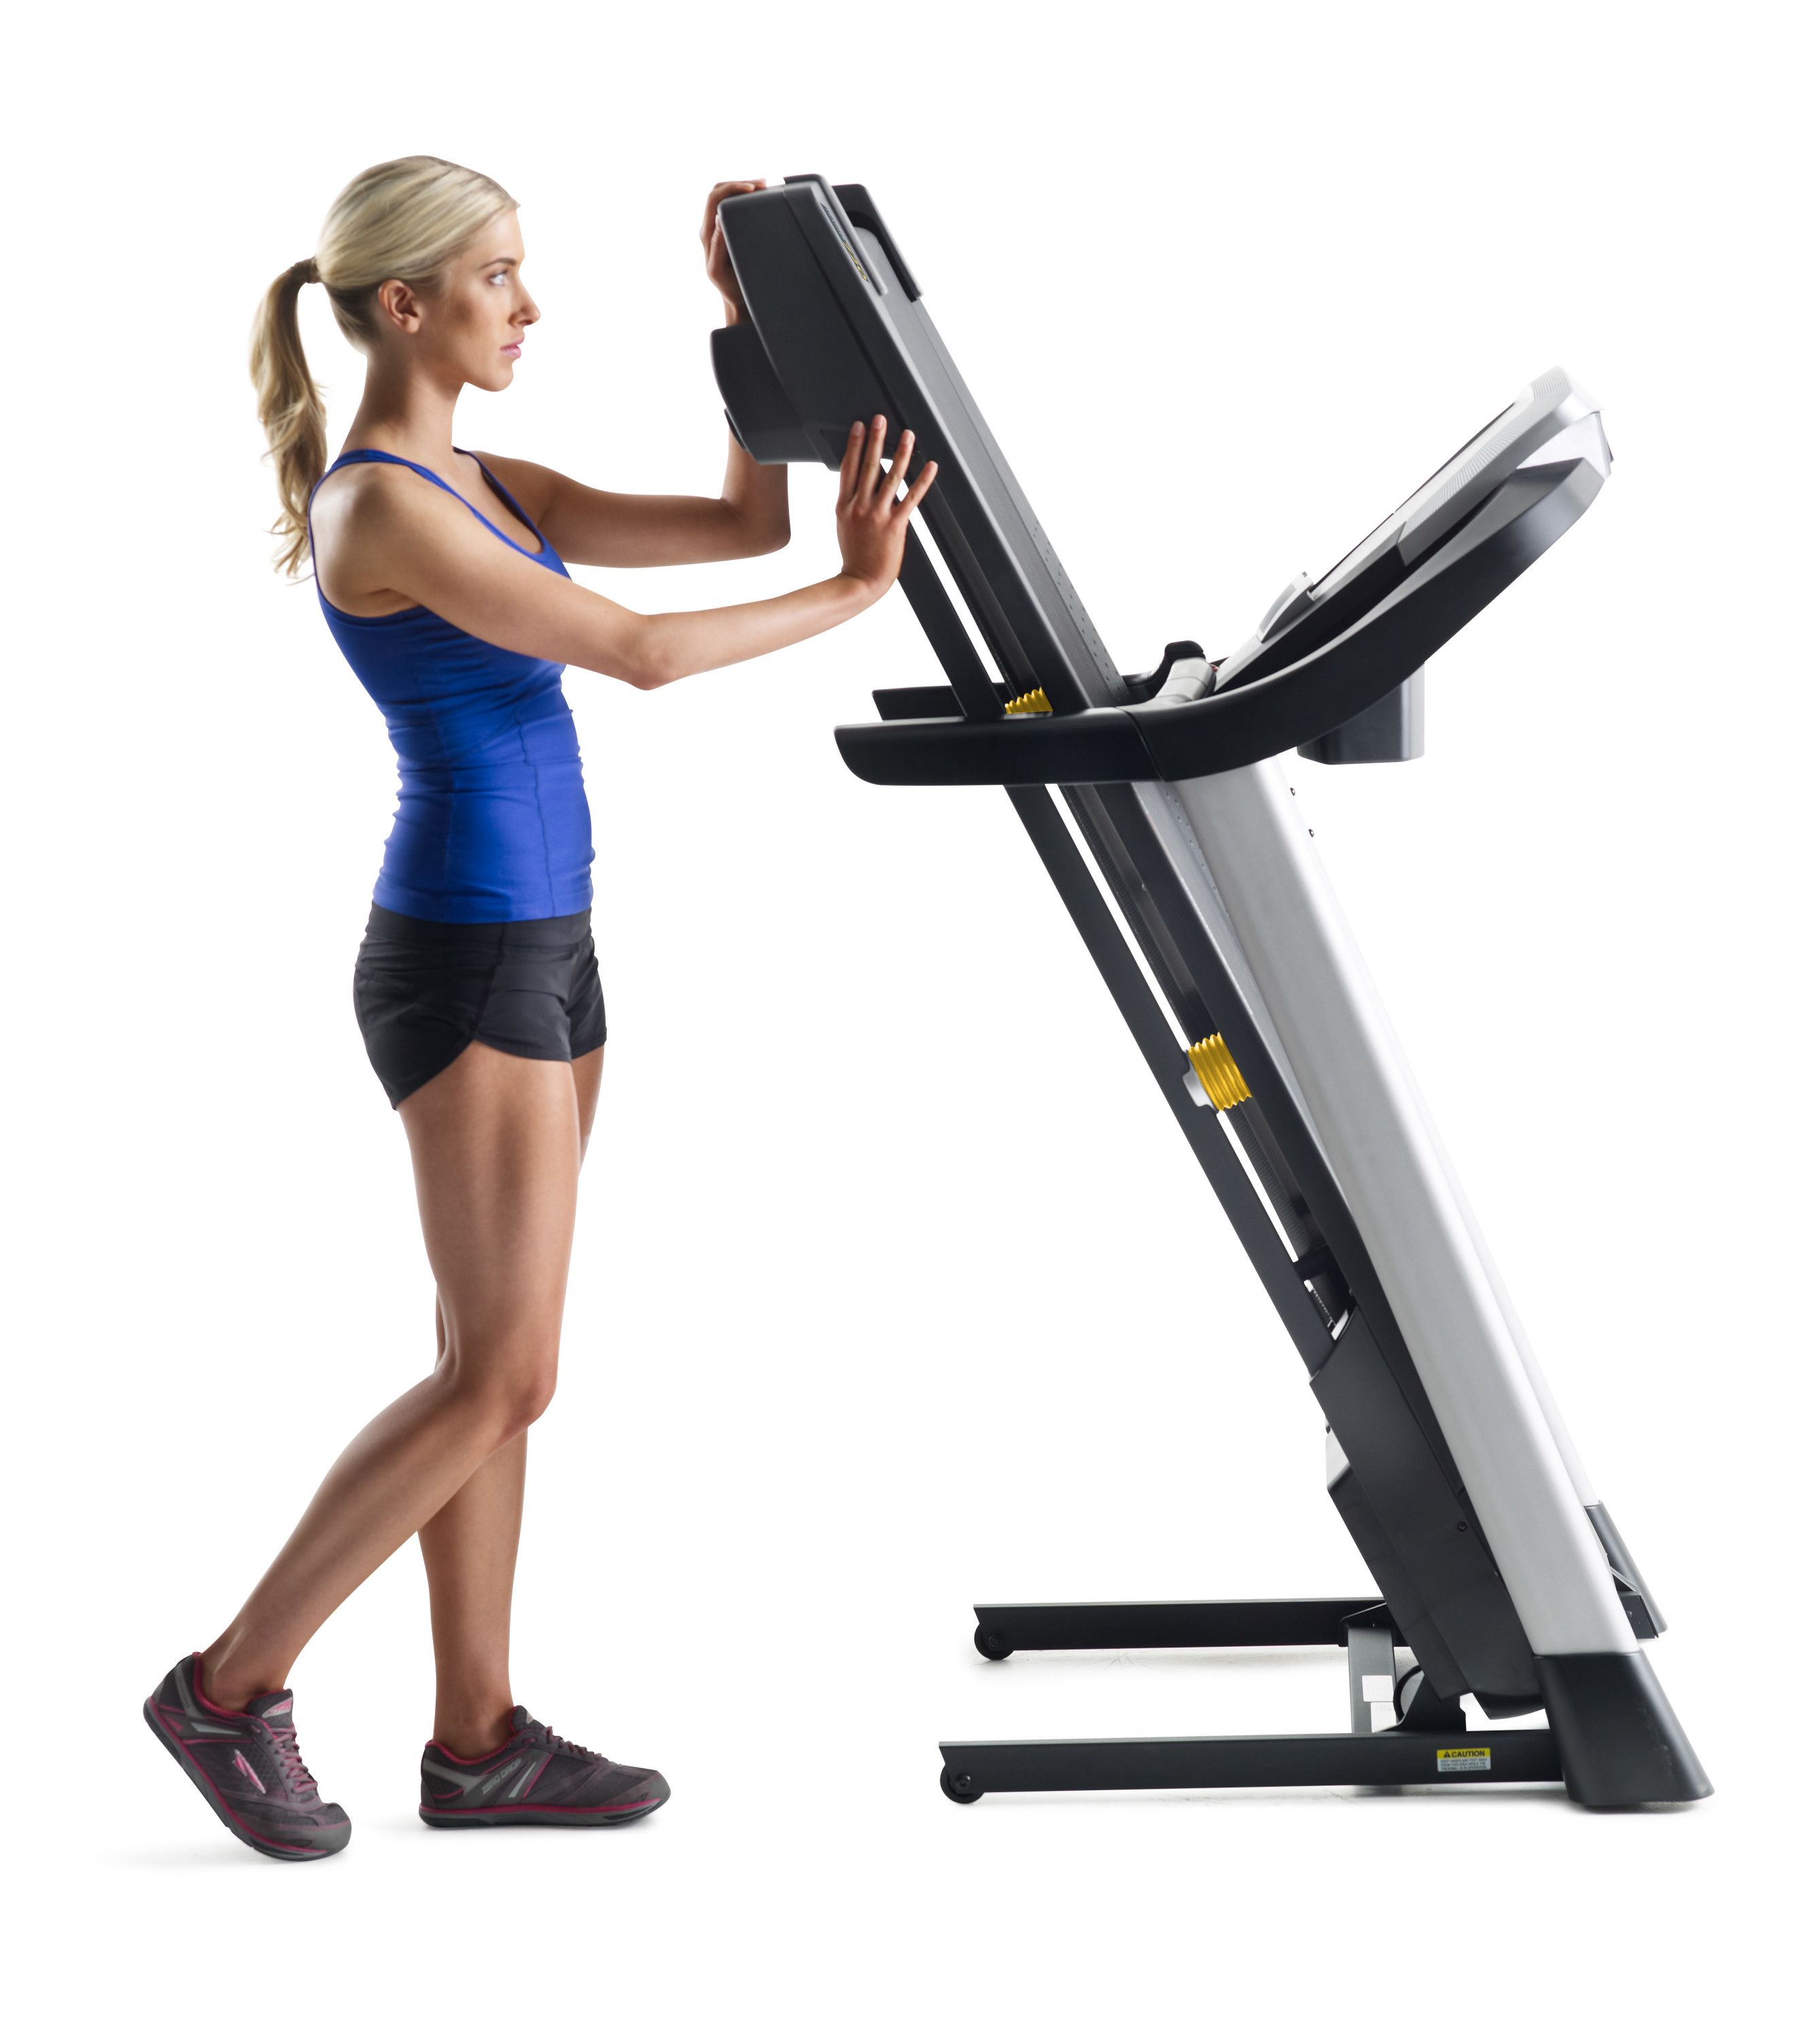 ProForm Trainer 720 Folding Treadmill with 10% Incline Training and 10 MPH Speed Controls - image 5 of 5